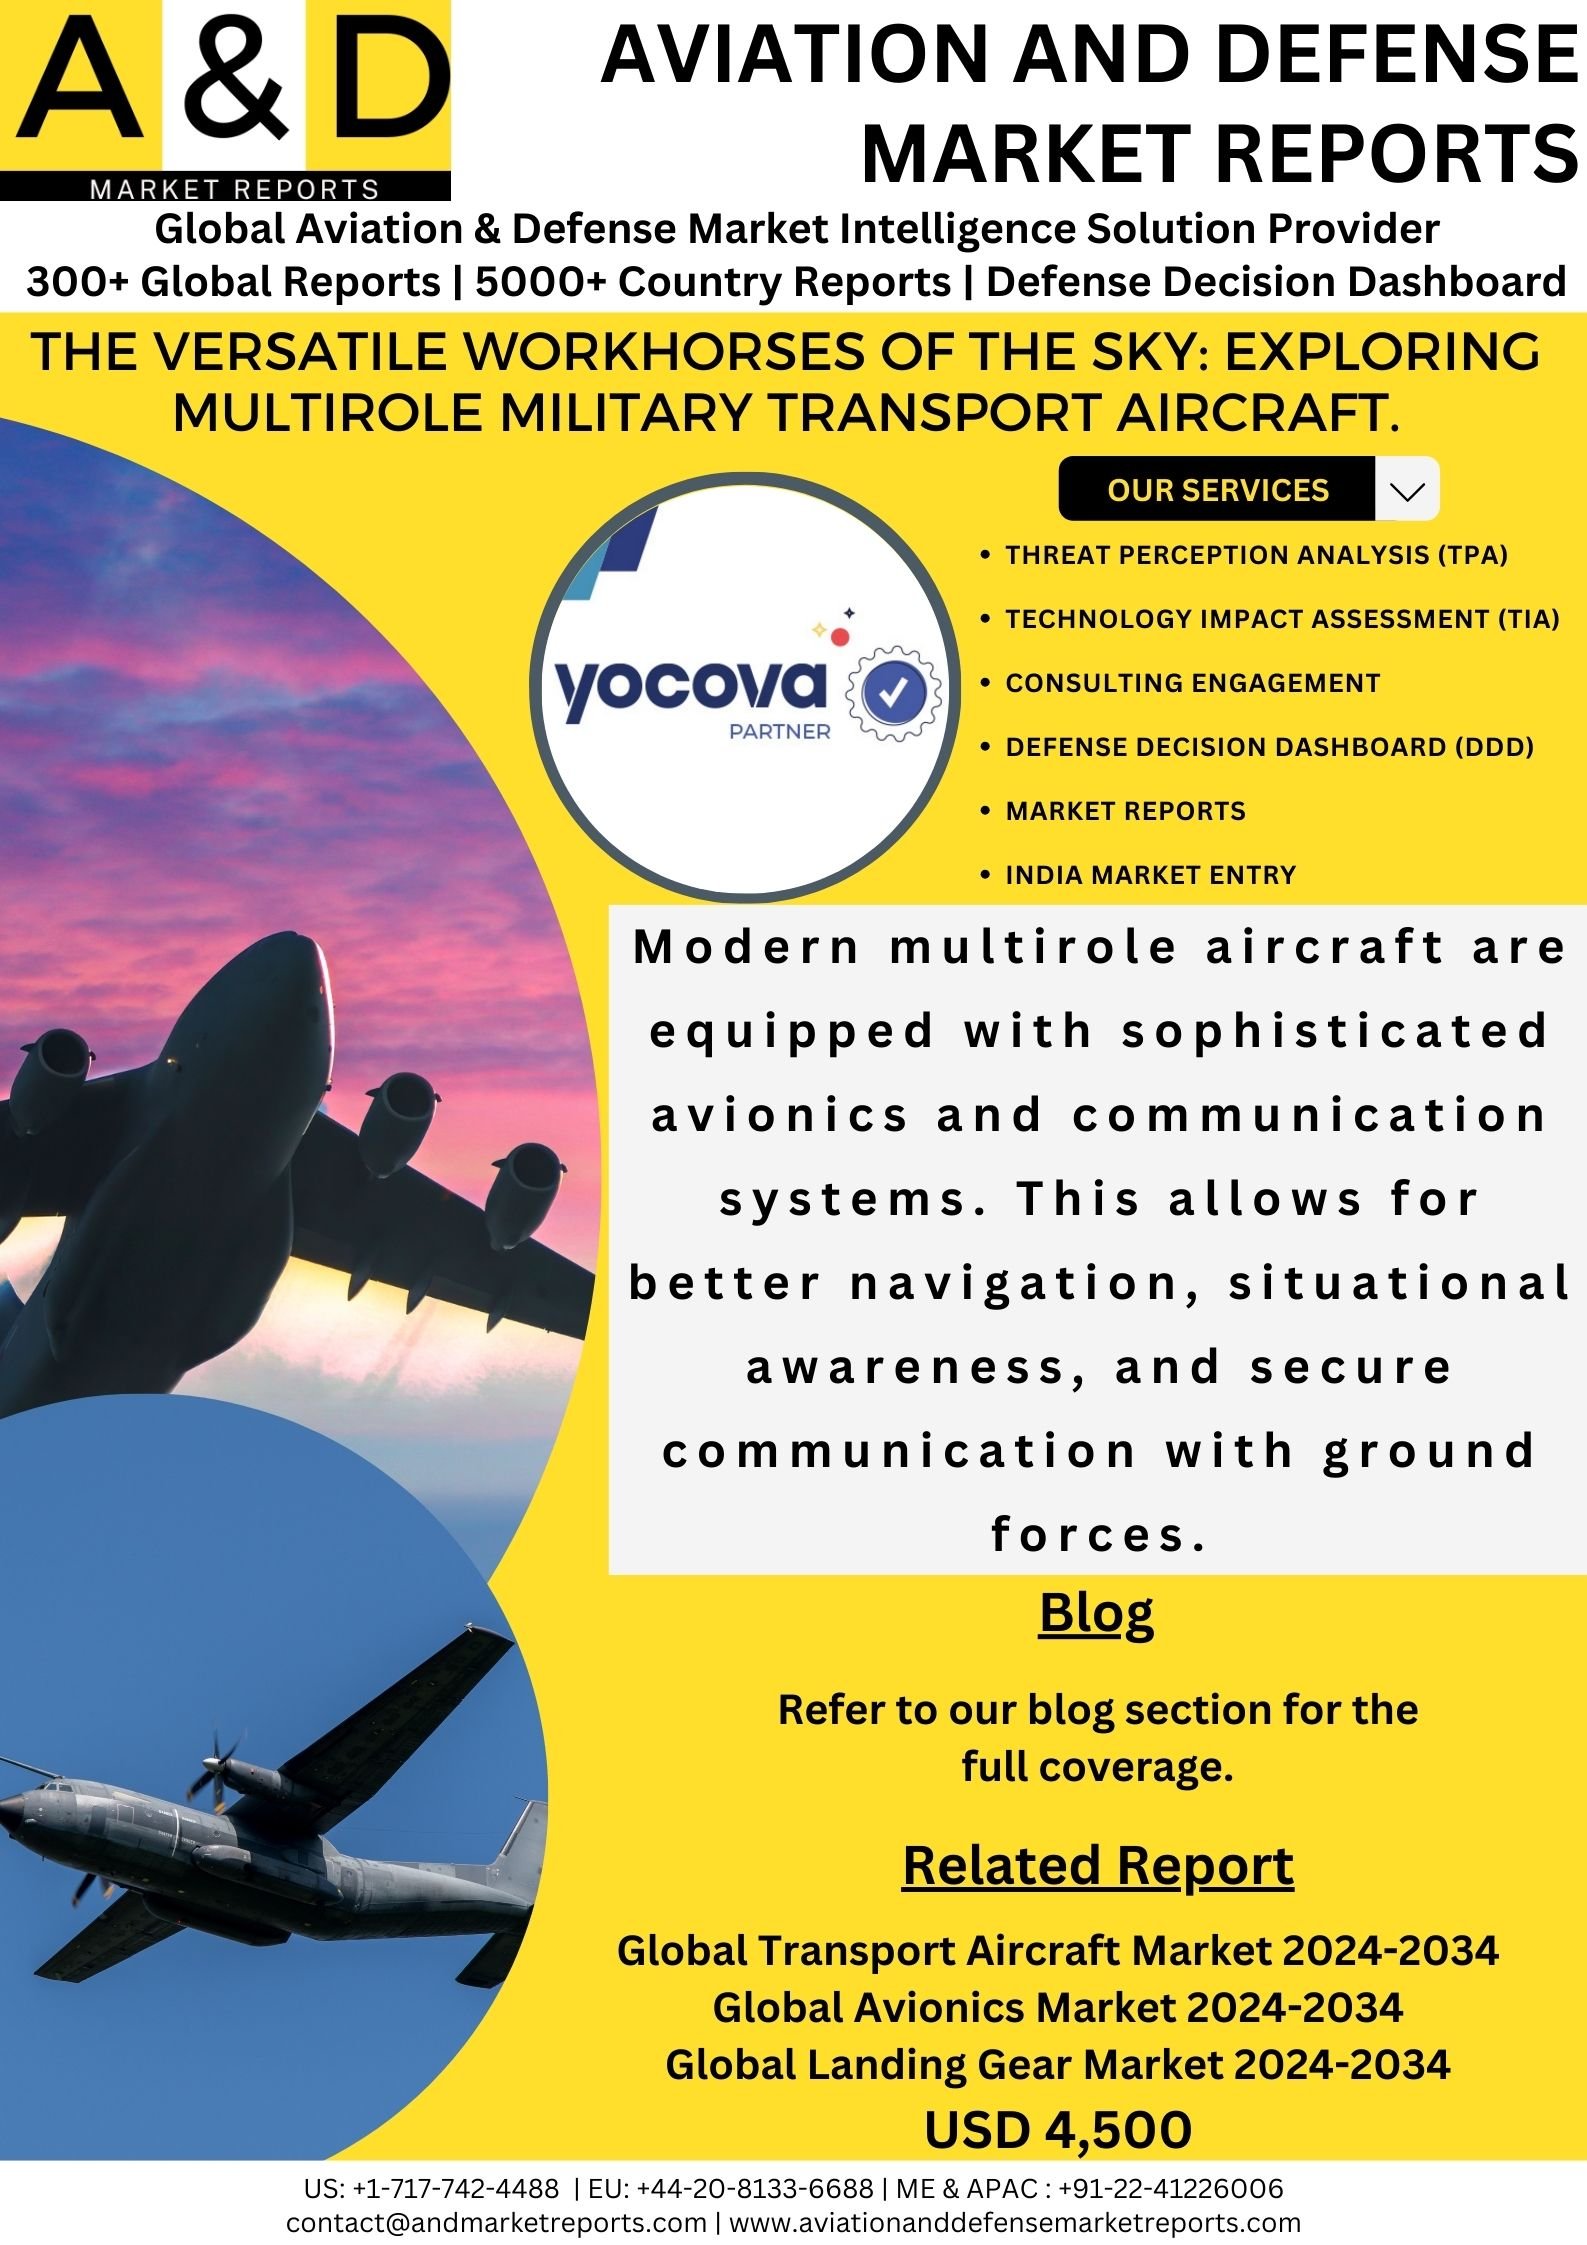 The Versatile Workhorses Of The Sky: Exploring Multirole Military Transport Aircraft